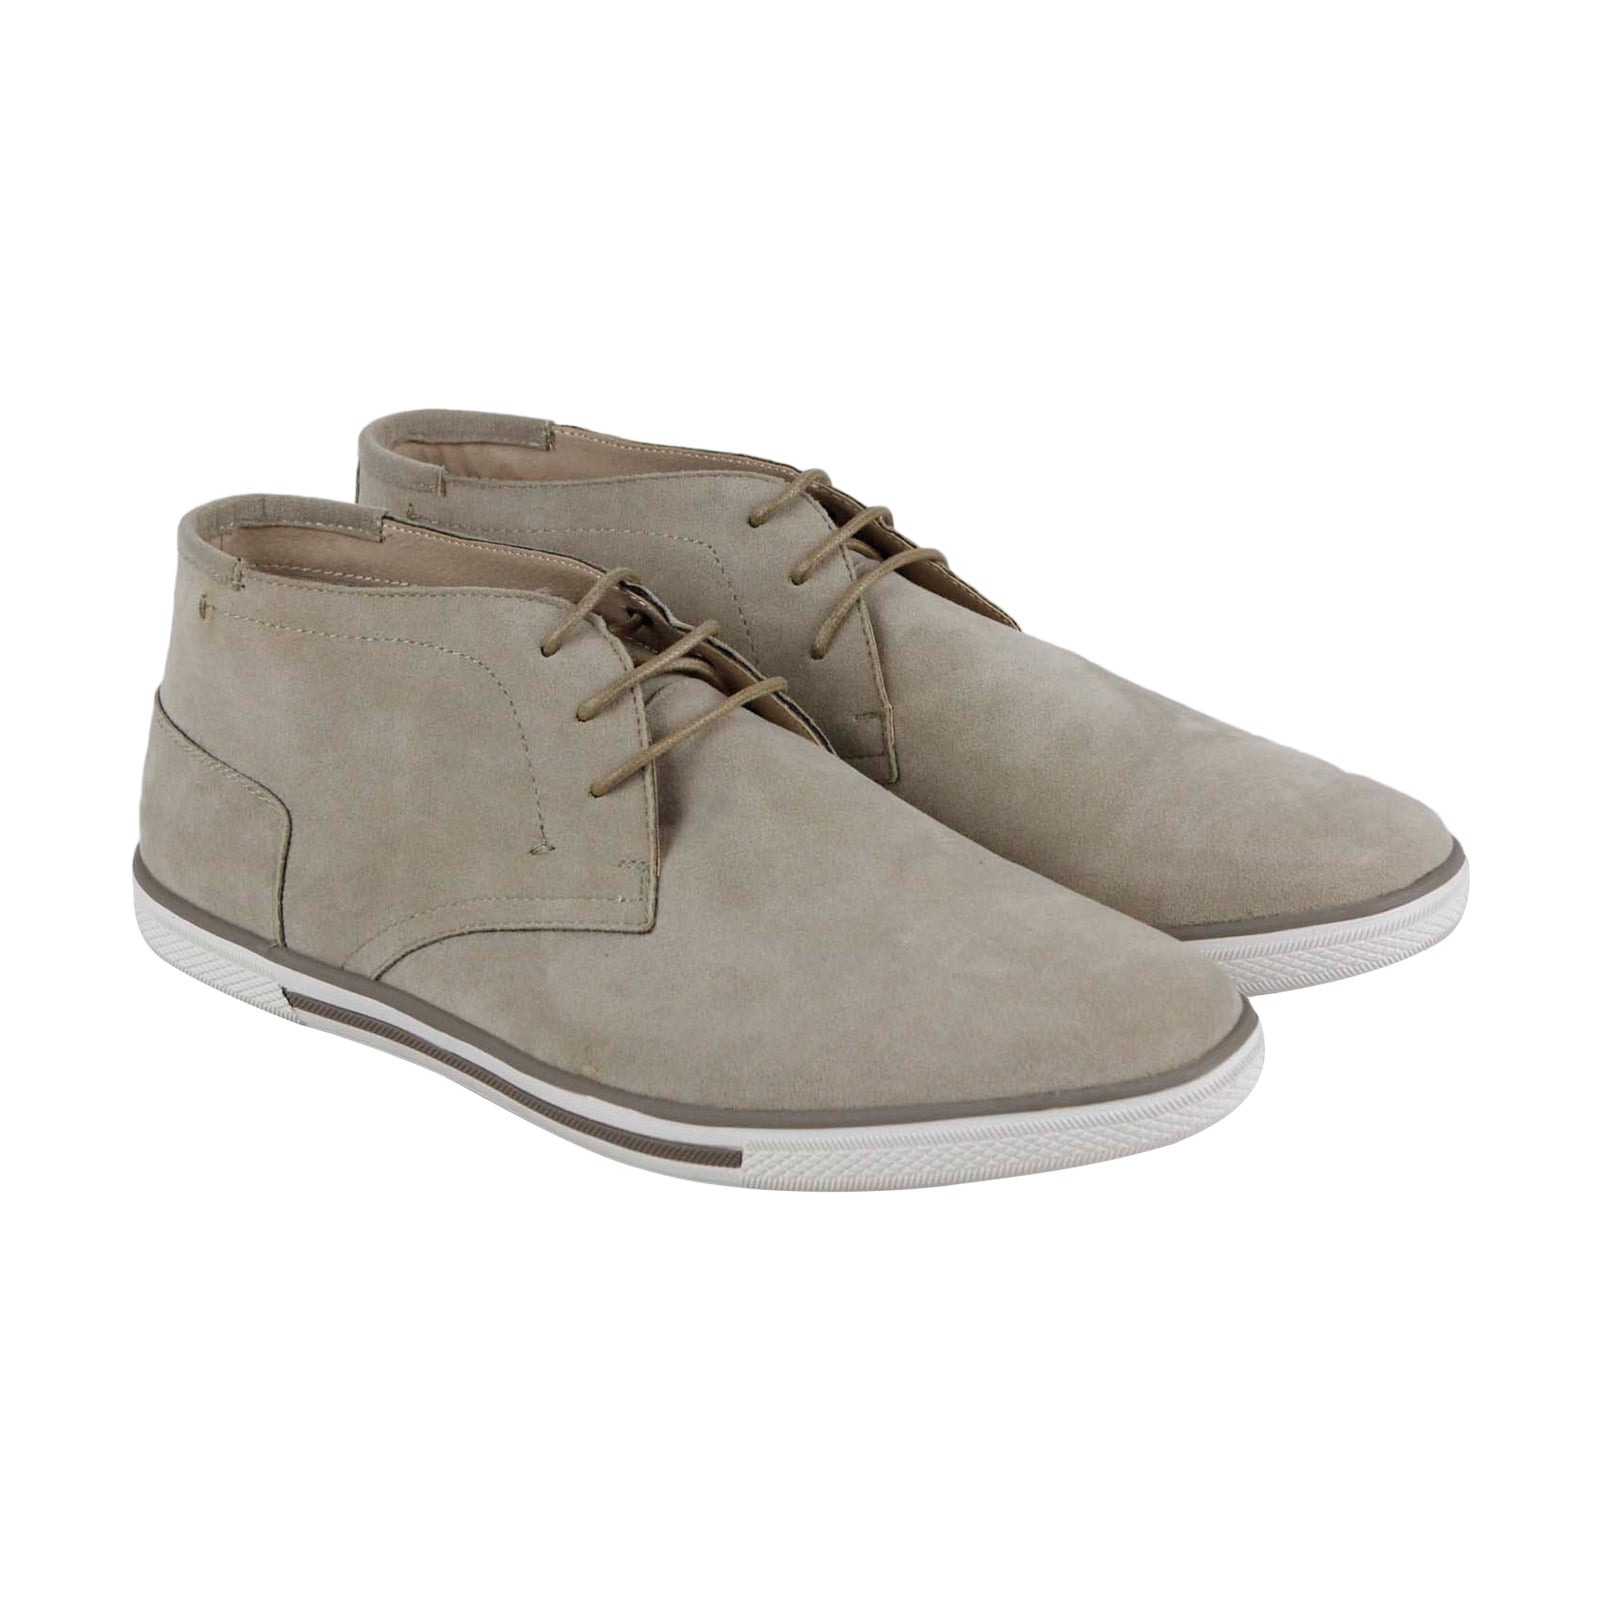 Kenneth Cole - Kenneth Cole Unlisted Many Crown S Mens Beige Suede Lace ...